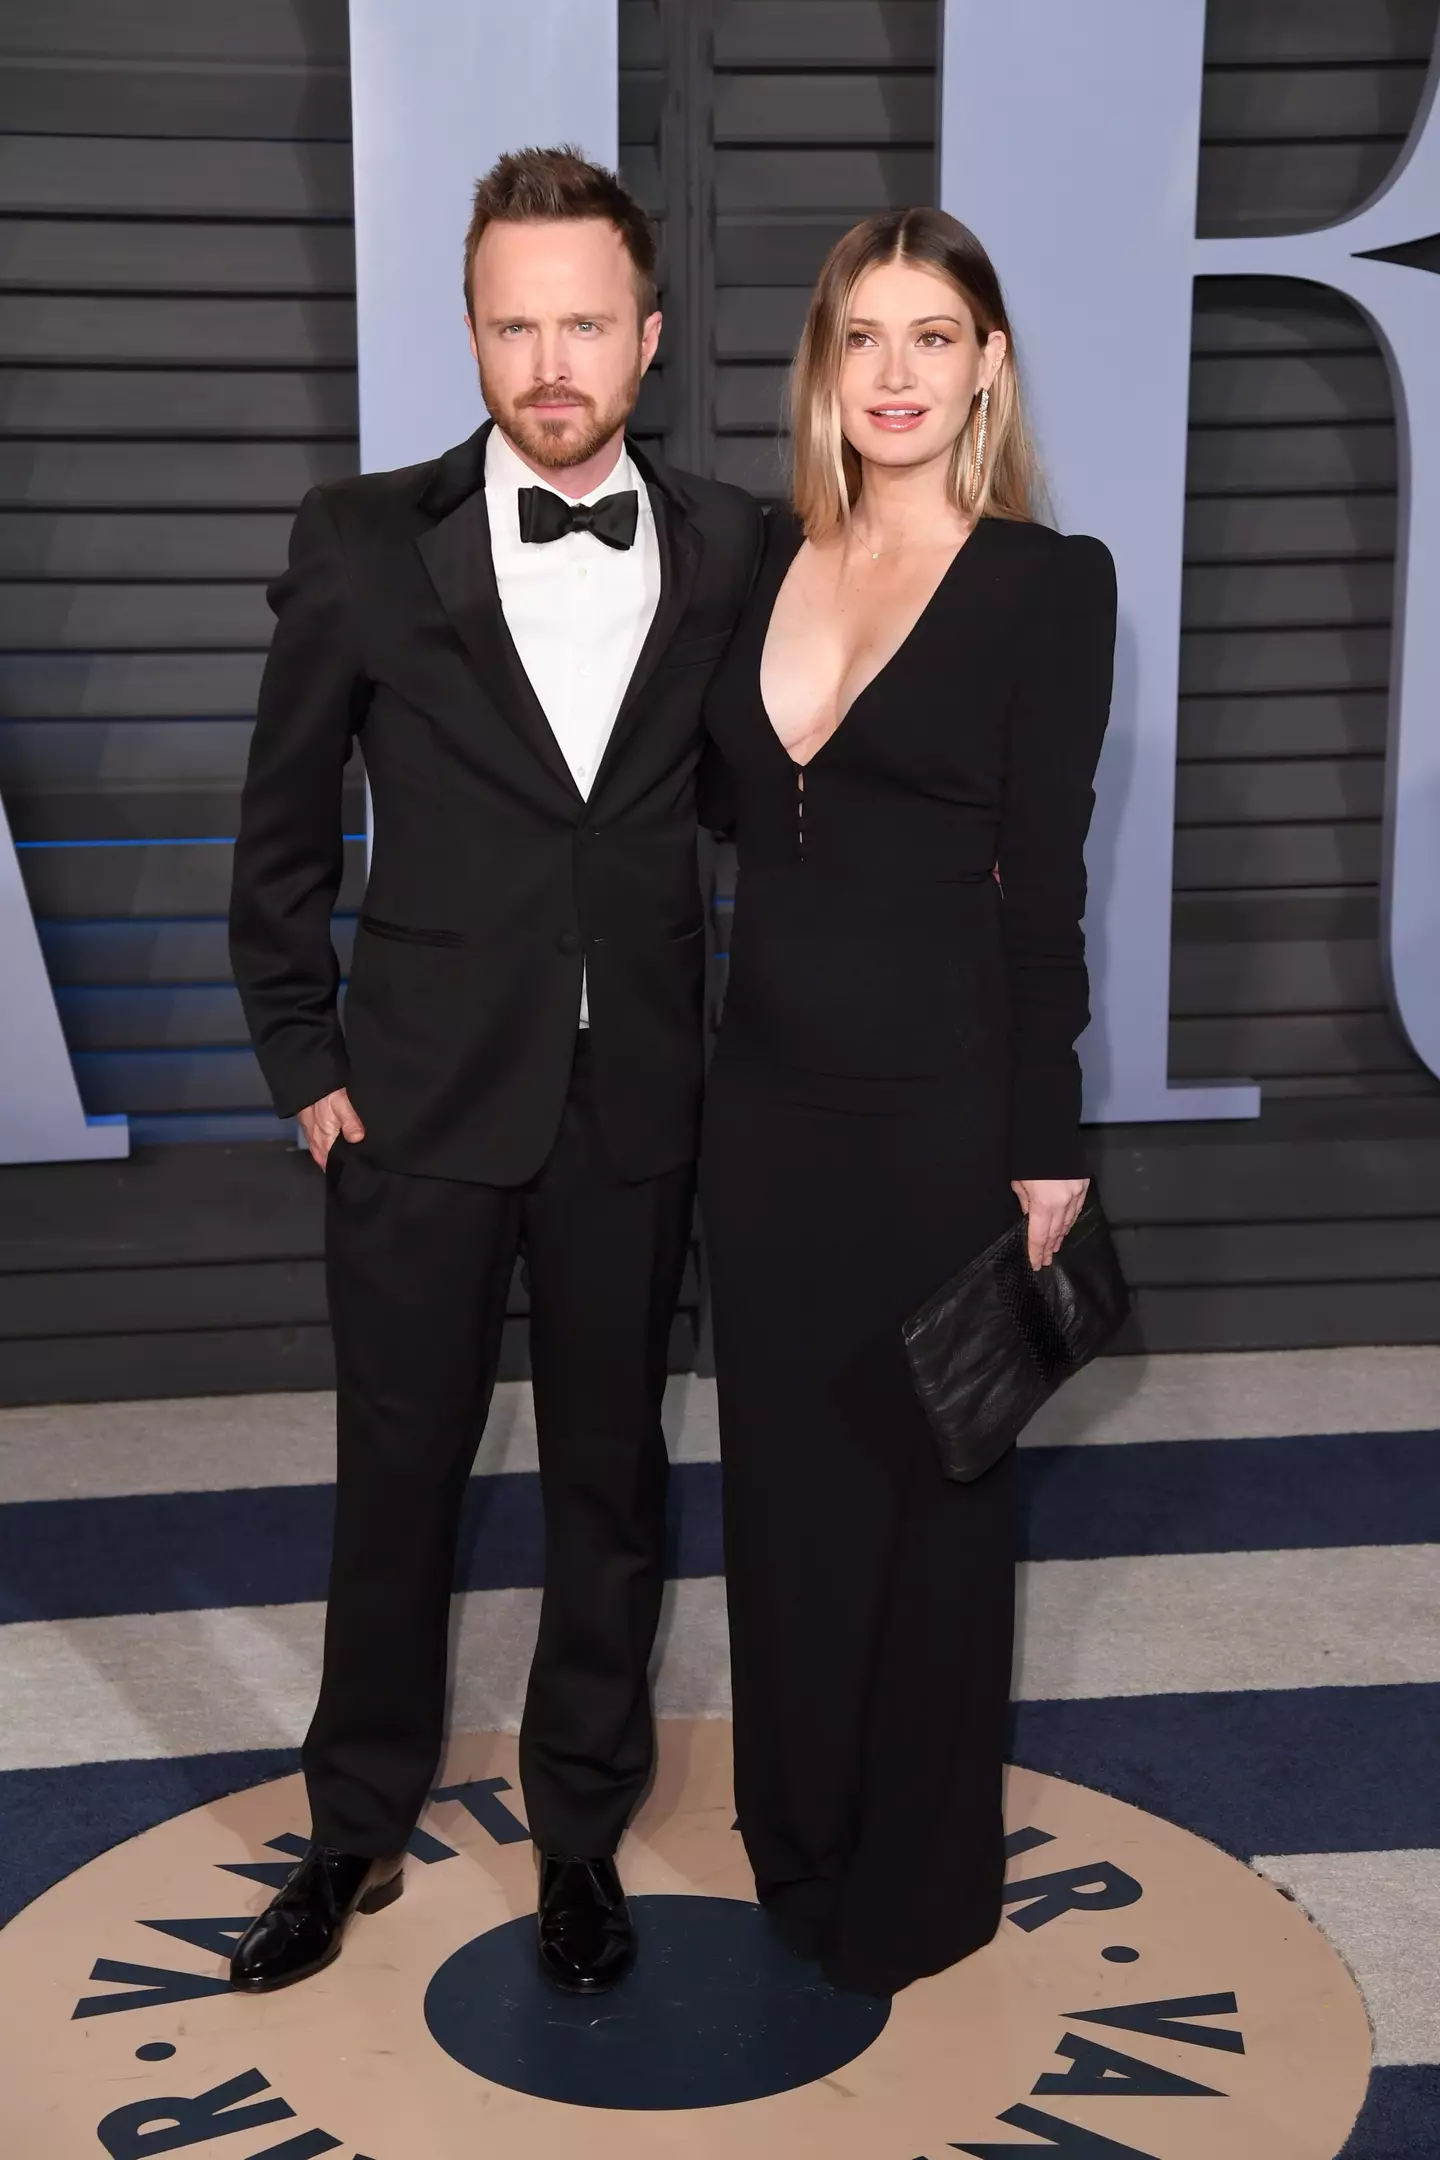 Aaron Paul and his wife Lauren Parsekian welcomed a little boy into the world seven months ago.